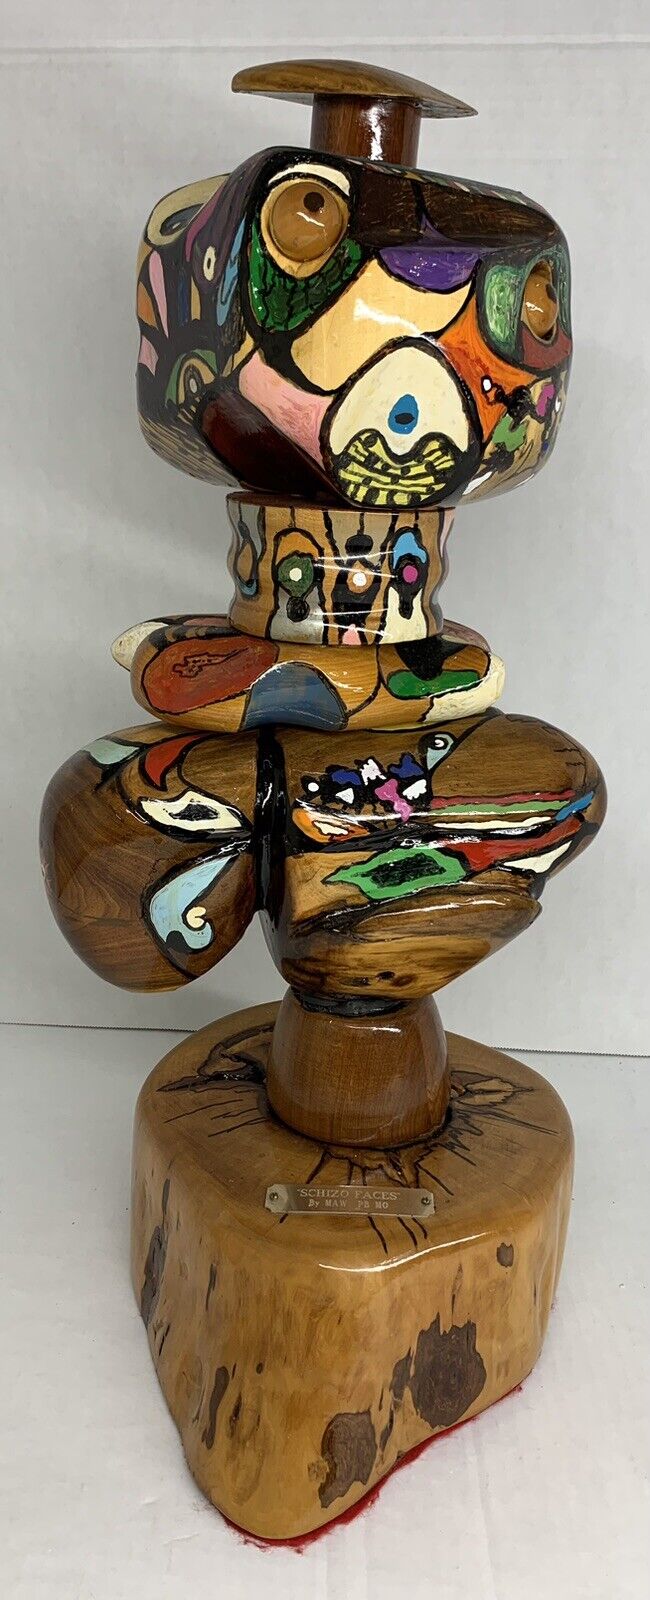 RARE ONE-OF-ONE Mack A Warren (Signed) ABSTRACT “SCHIZO FACES” Sculpture - READ